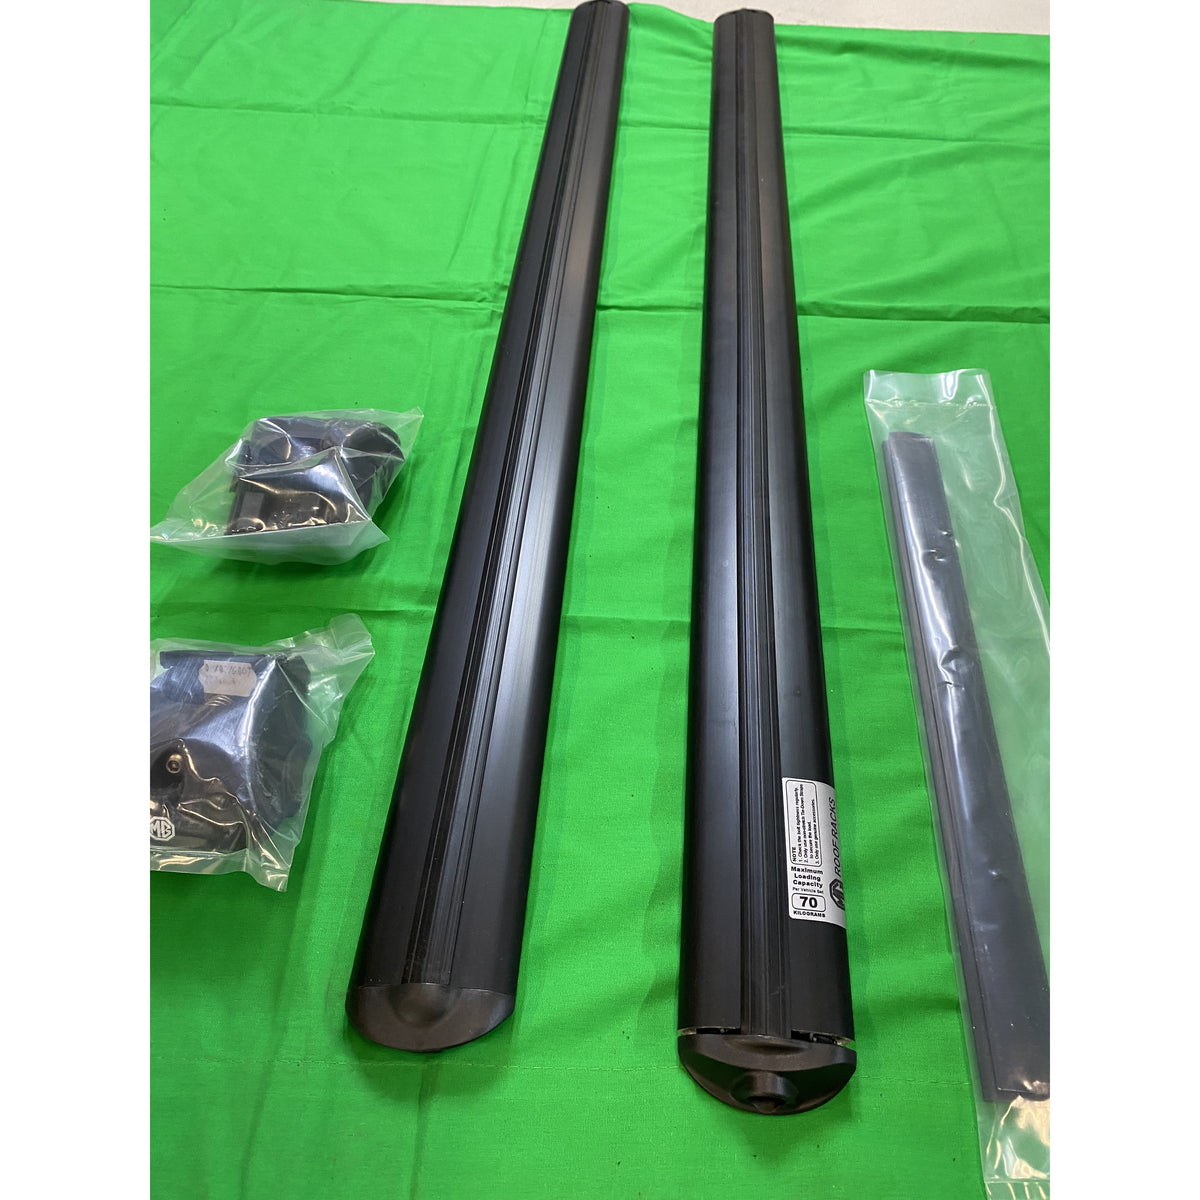 MG ZS, MG ZST, MG ZSEV Genuine Roof Rails kit - Black With Logo - Set Of 2 | ARG Parts & Accessories.